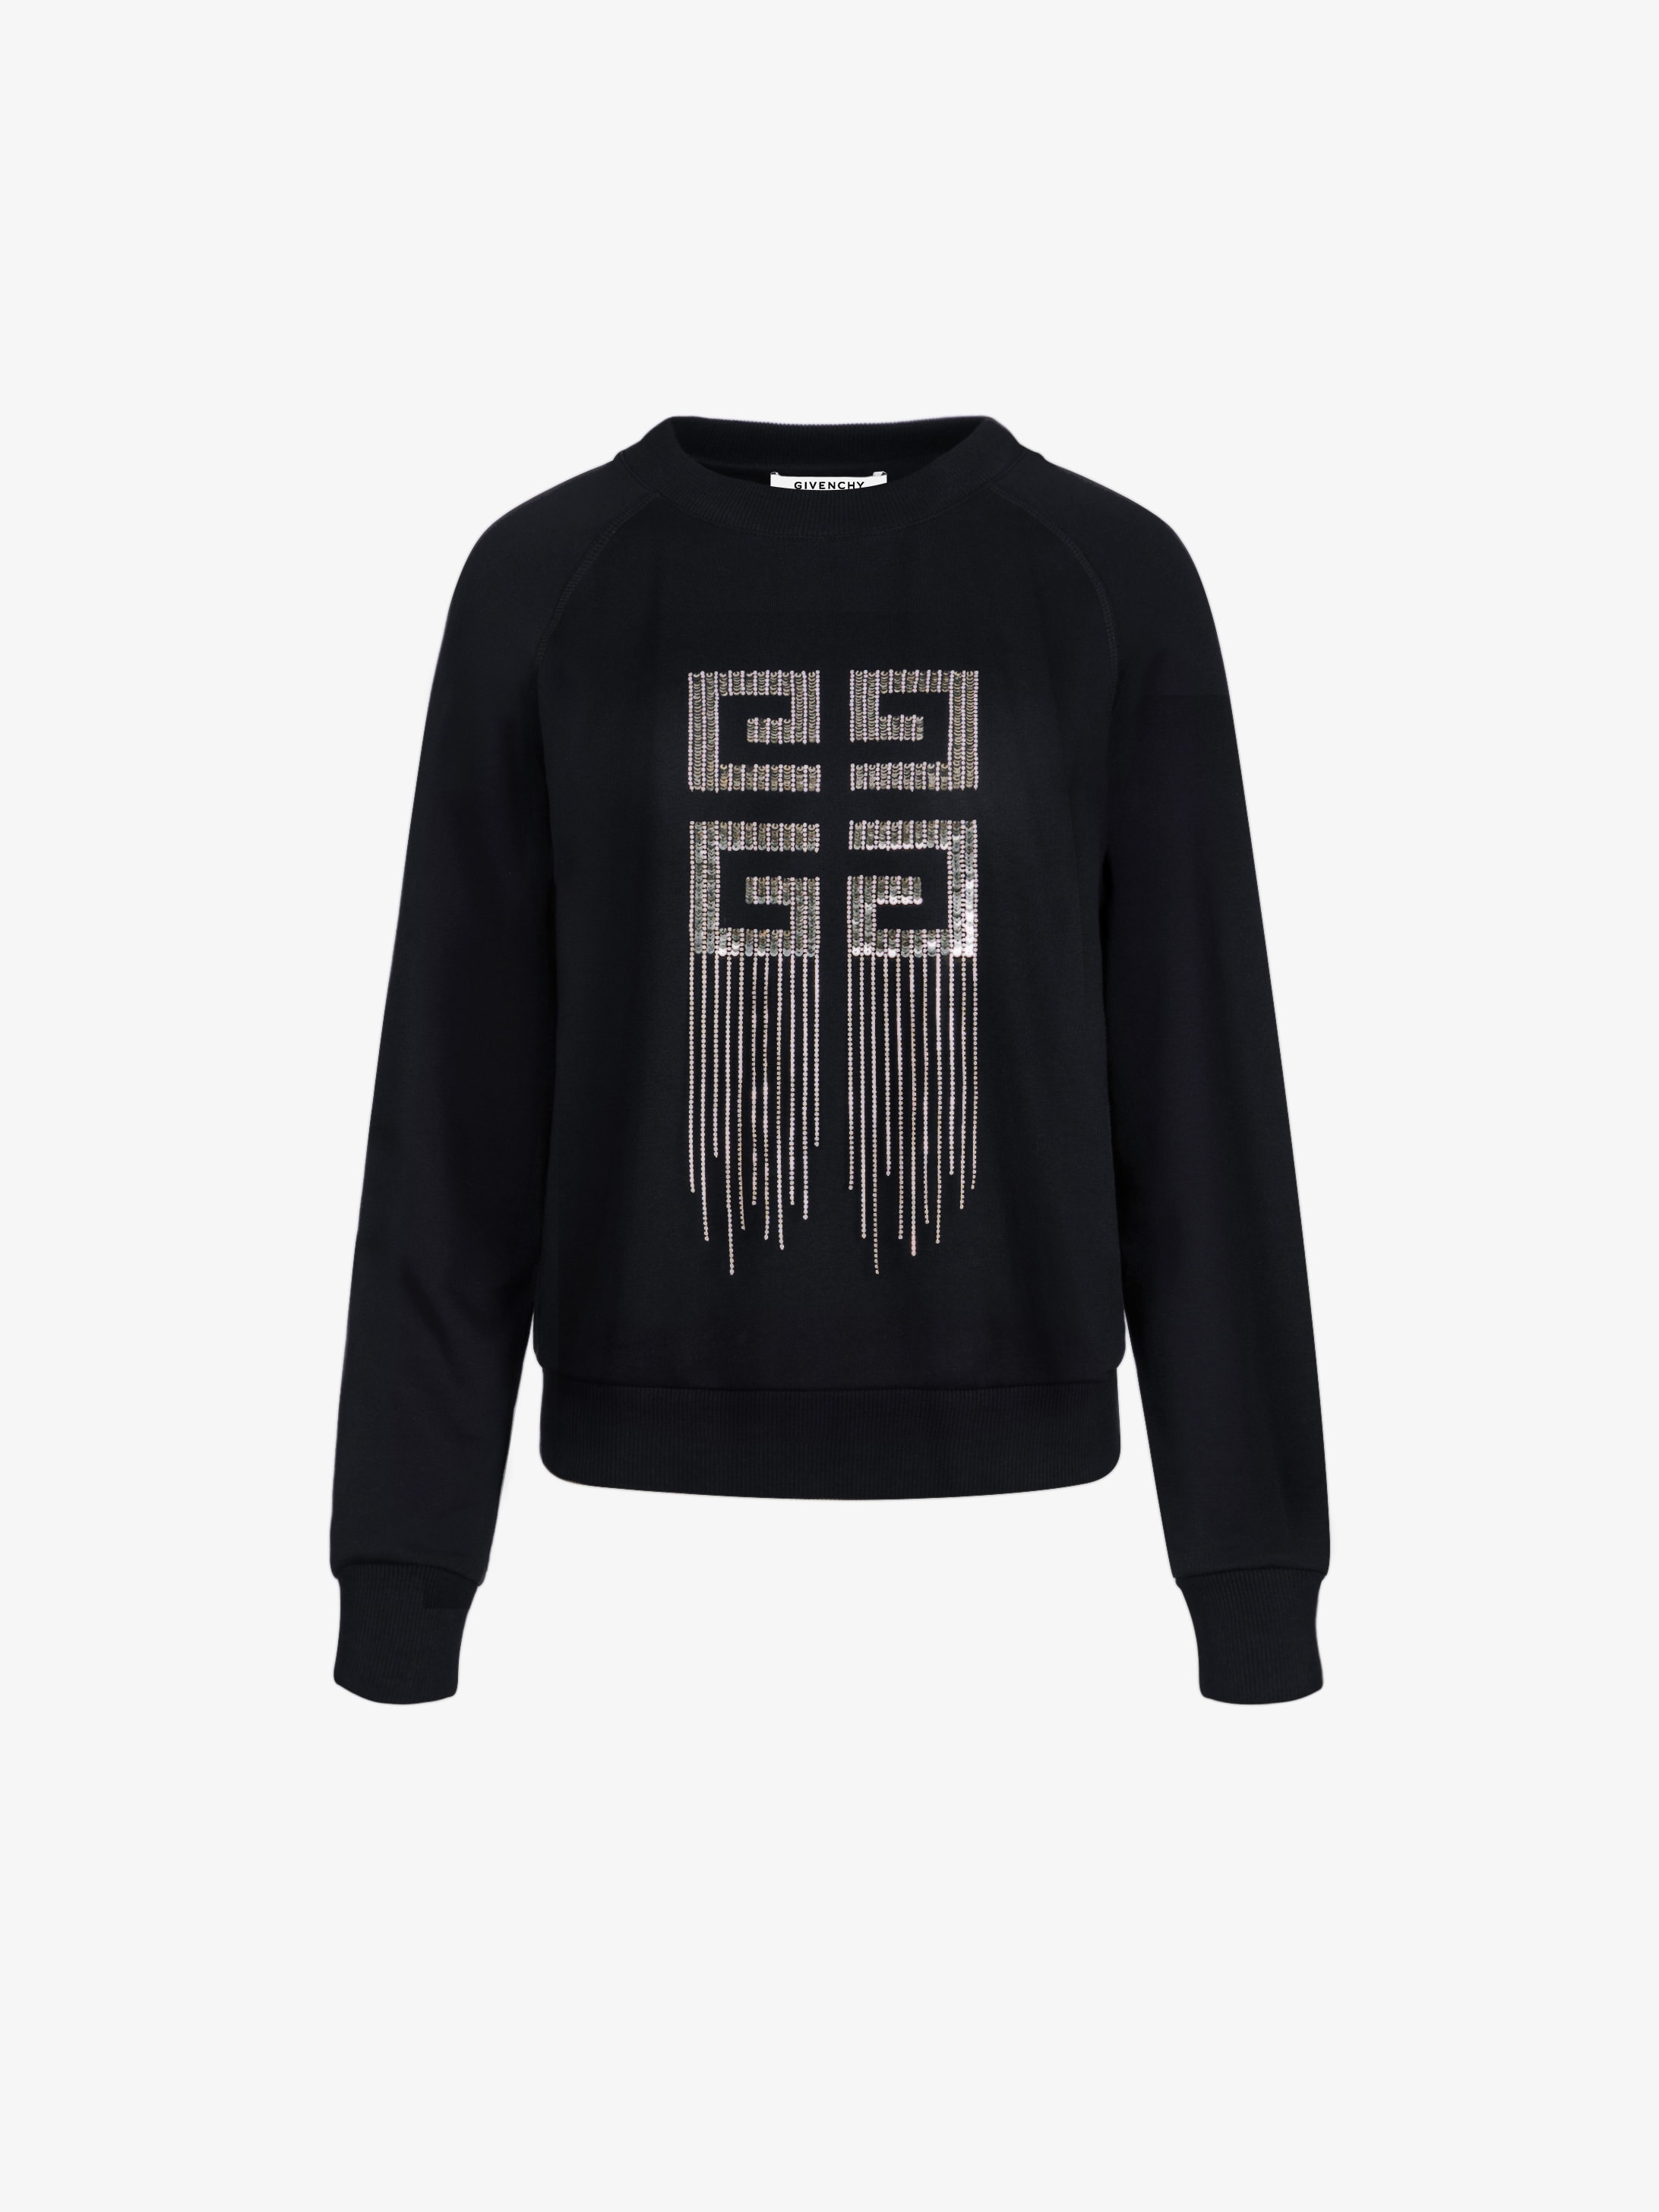 4G embroidery sweatshirt in sequins and crystals | GIVENCHY Paris